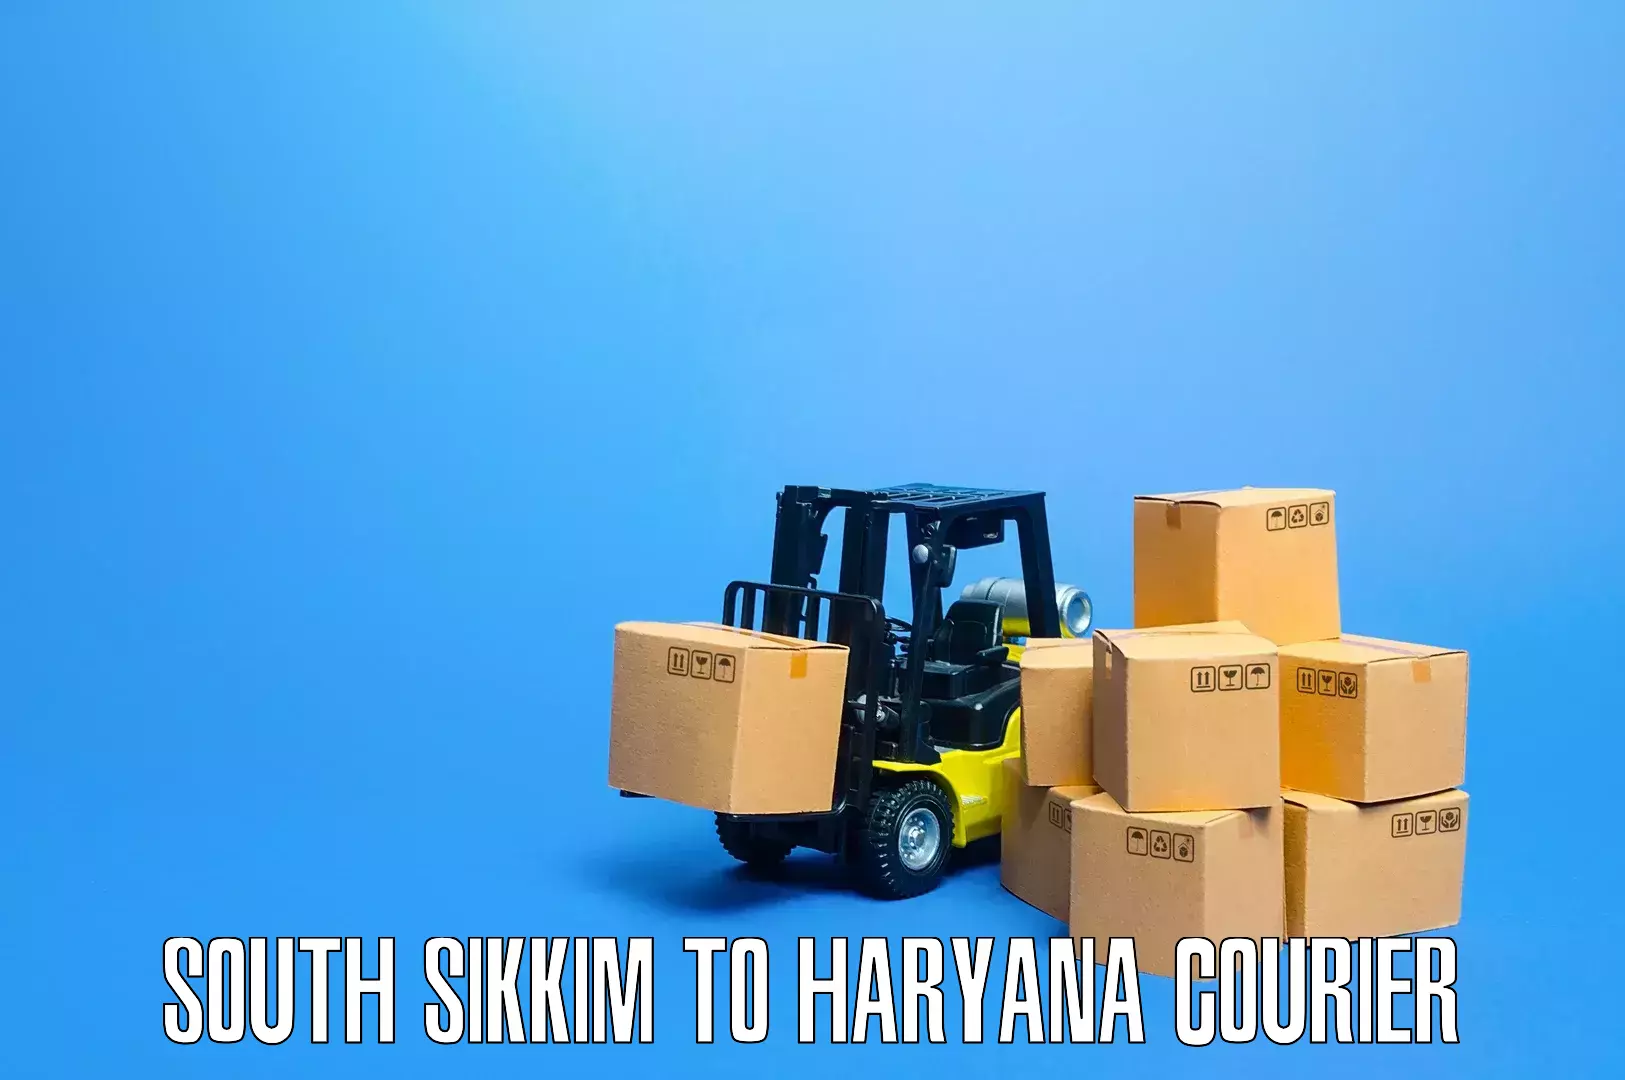 Quality relocation services South Sikkim to IIIT Sonepat